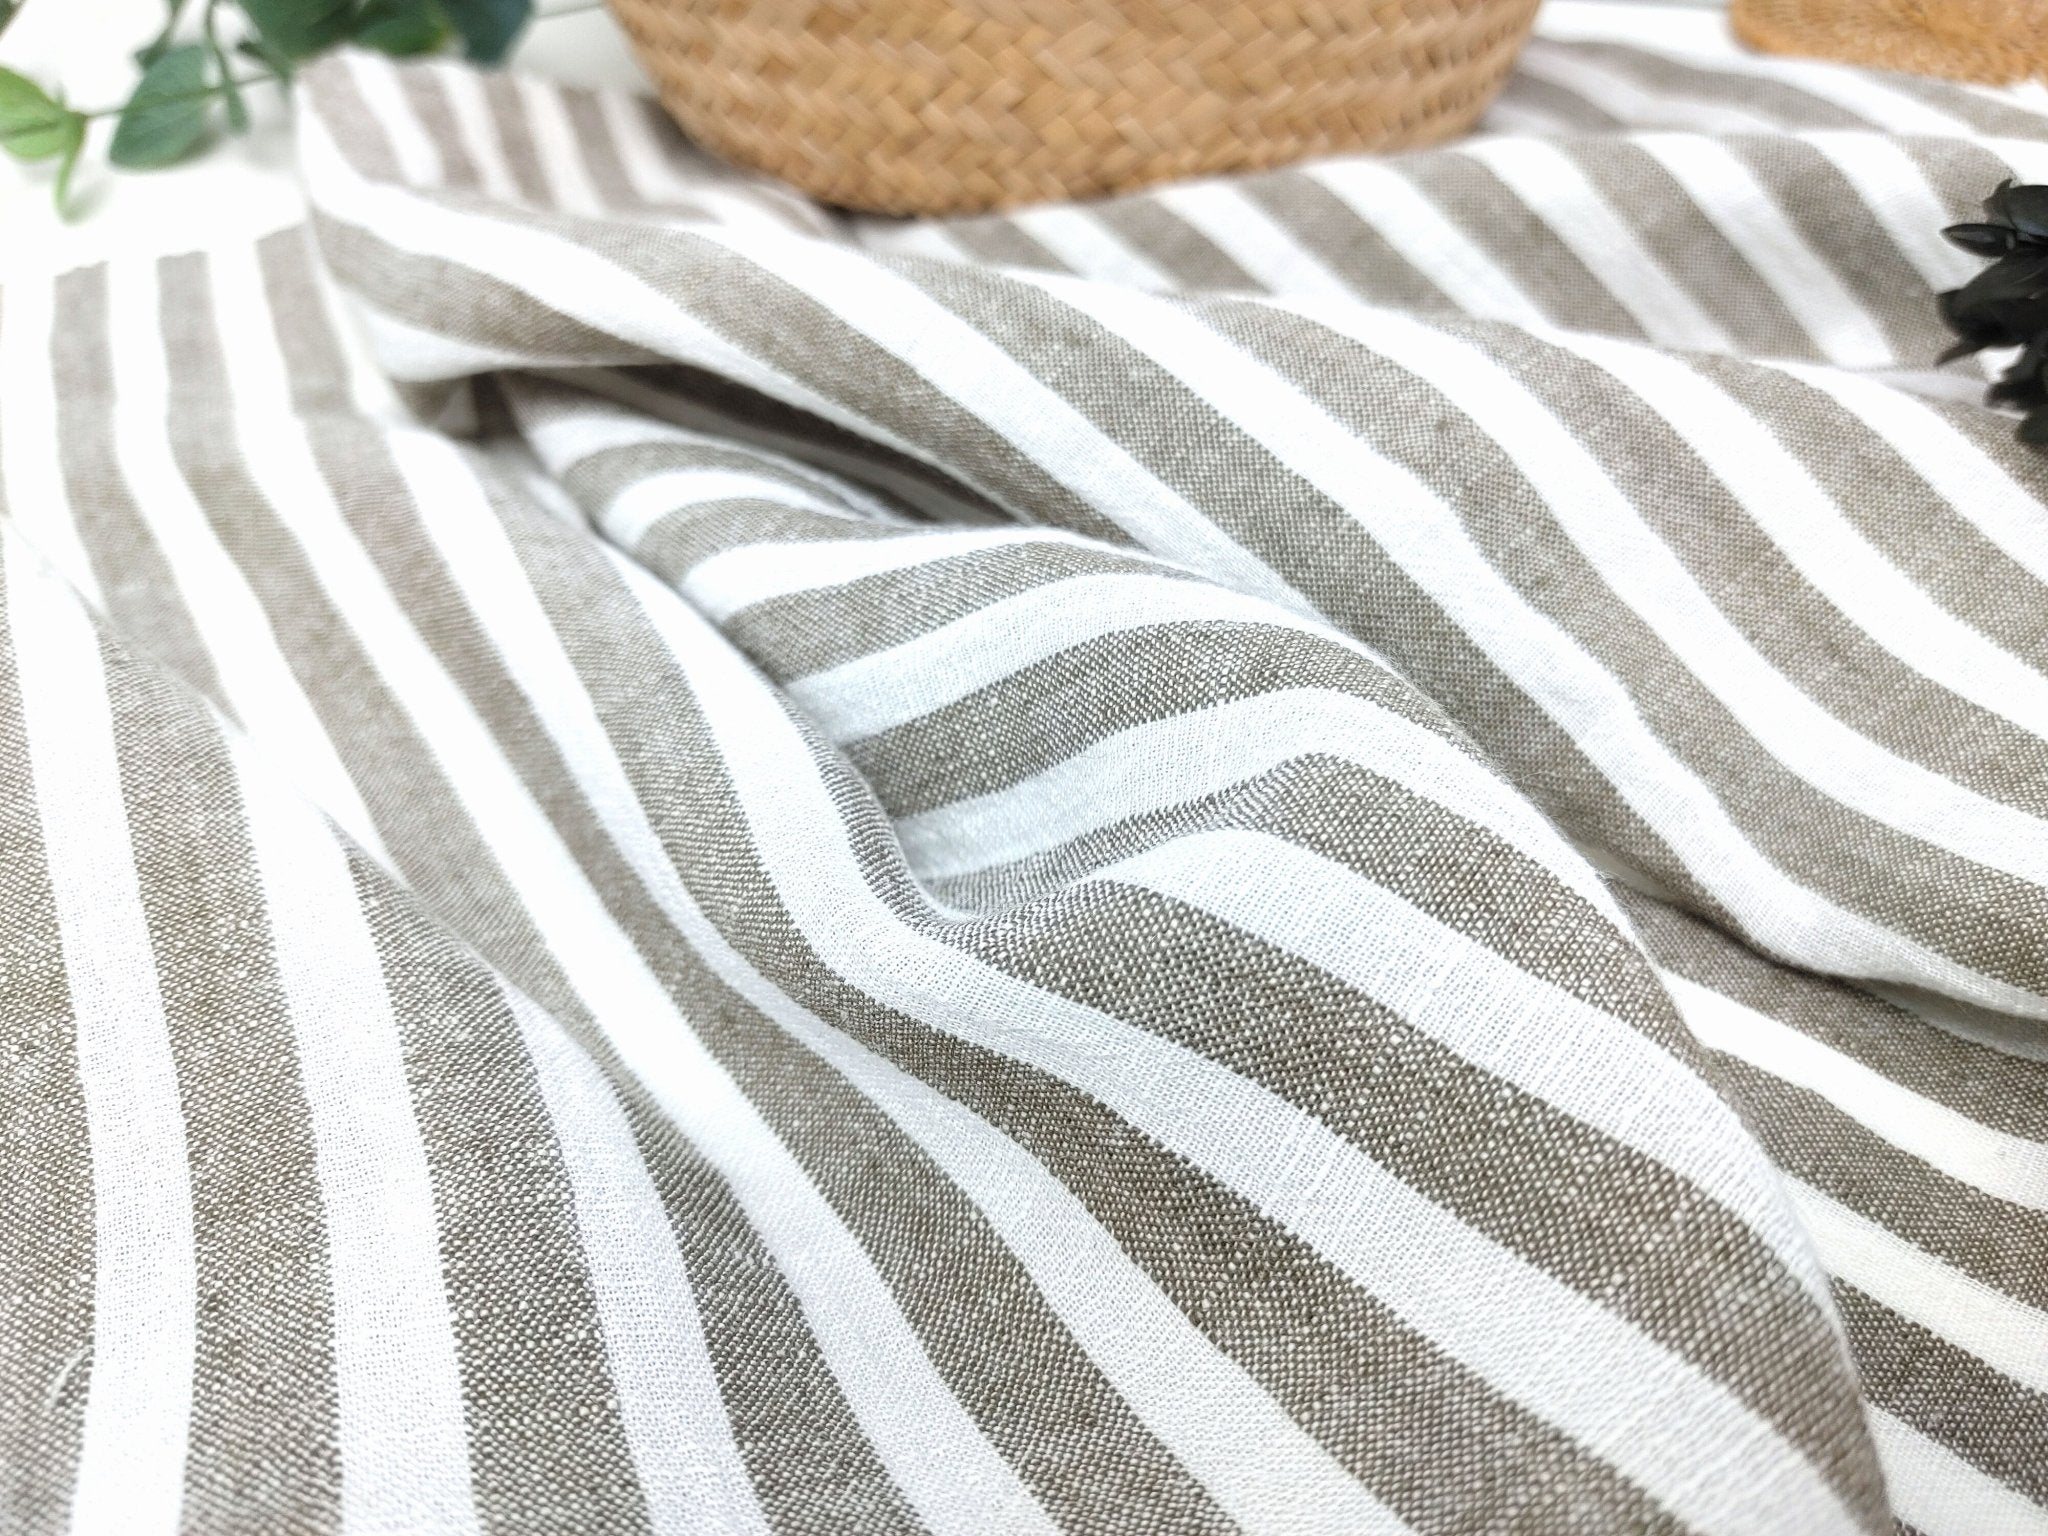 Effortless Stripes: Linen Rayon Blend Fabric with Subtle Wrinkle Charm 6518 - The Linen Lab - Khaki